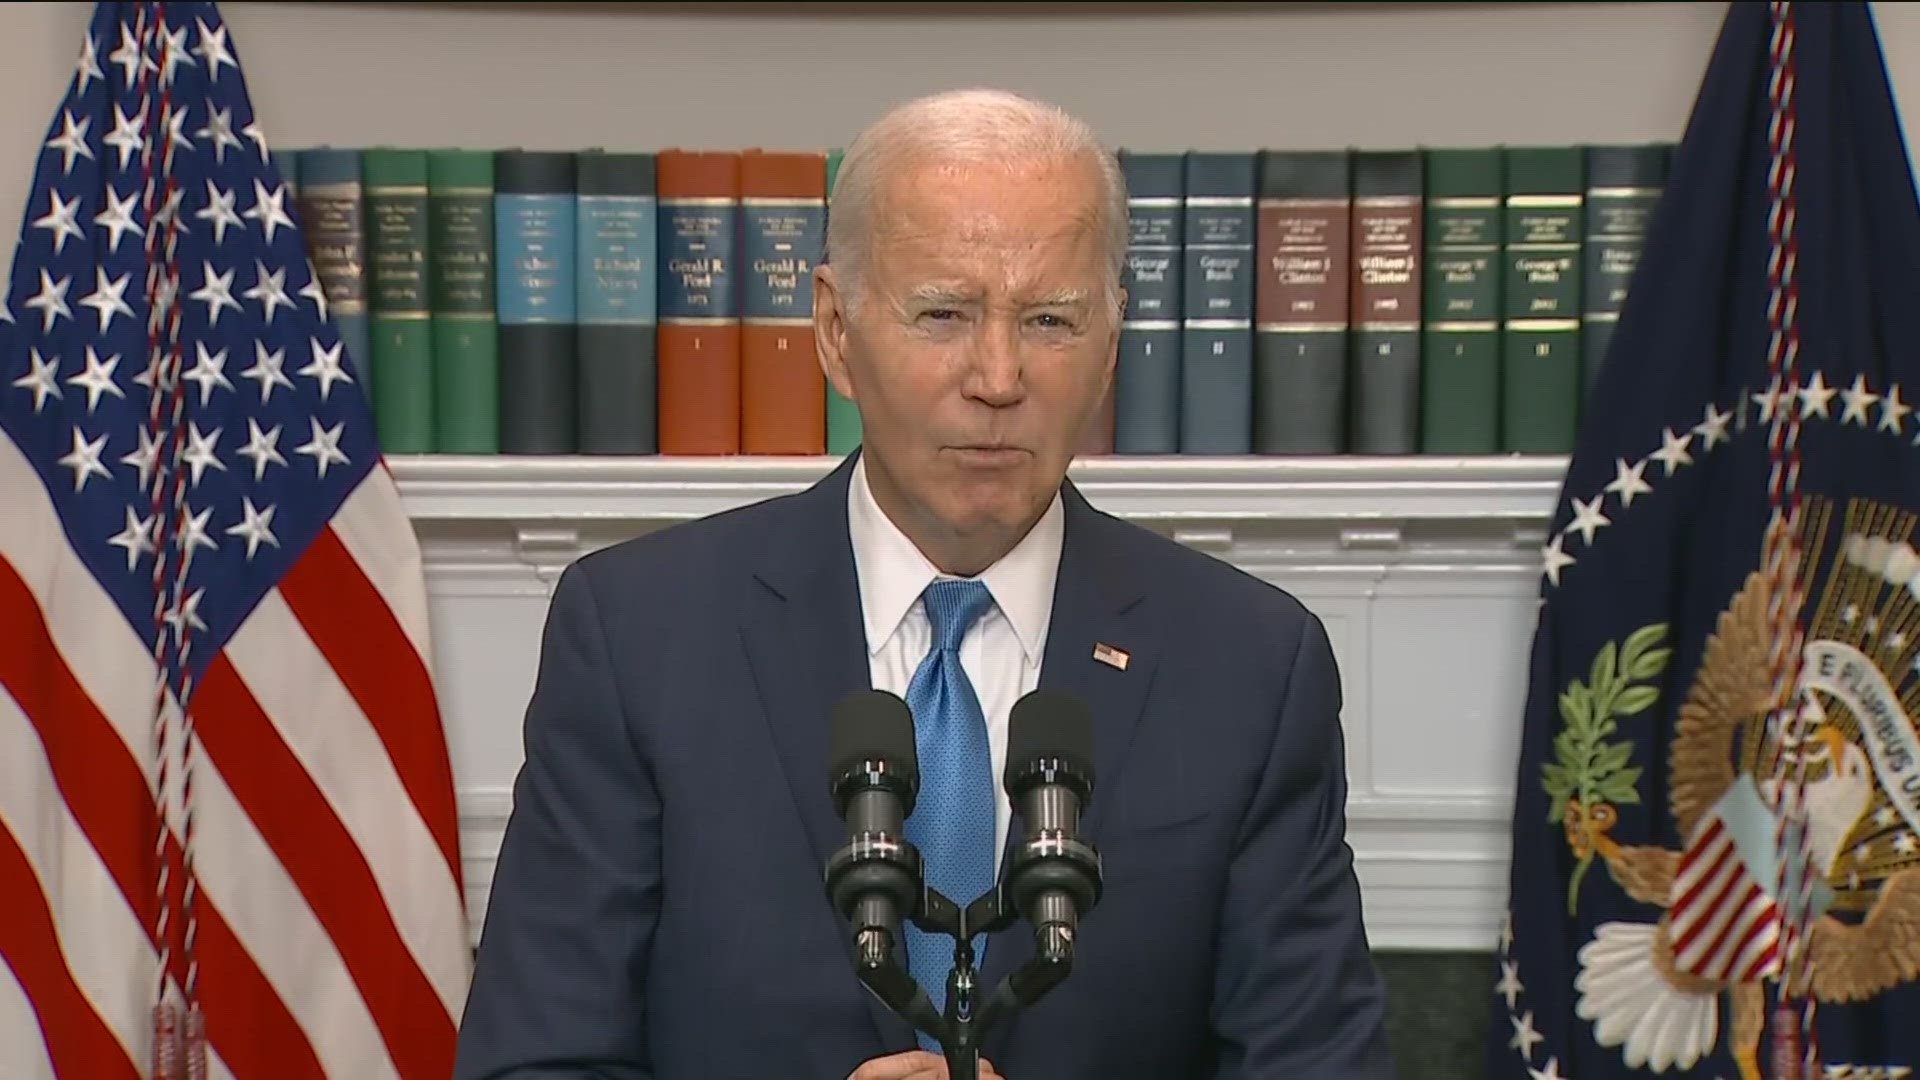 "No one wants a strike," President Biden said earlier Friday as the UAW took the picket lines in Toledo and at two other plants.